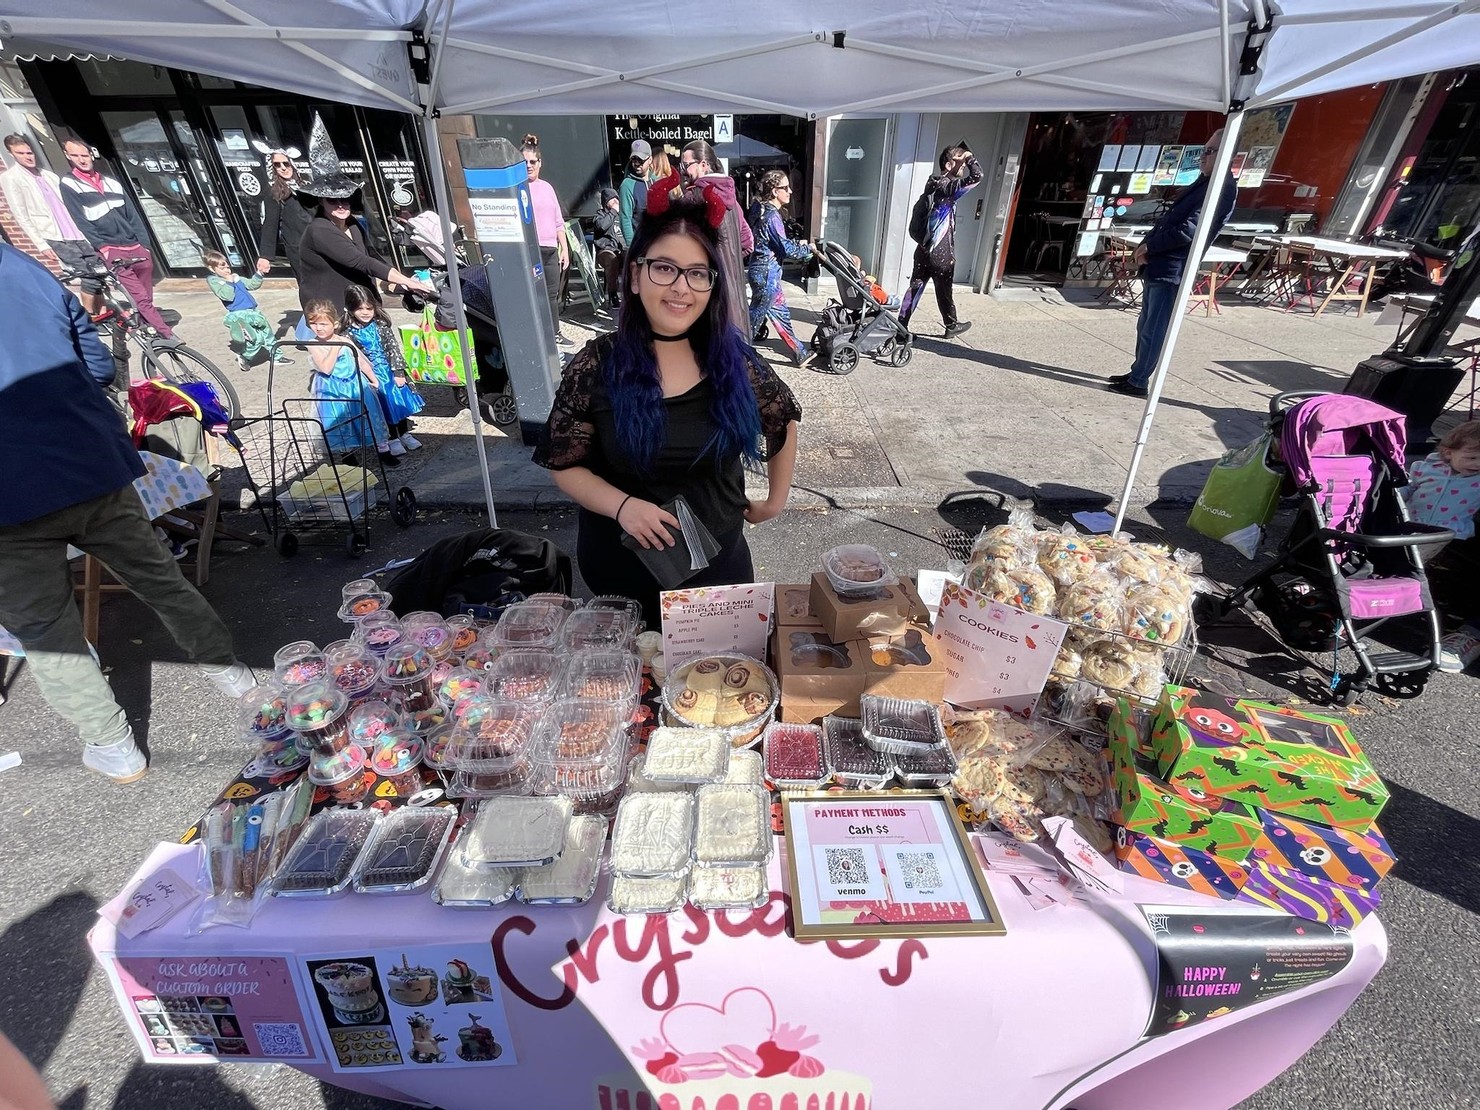 A smiling person standing at a table of baked goods.